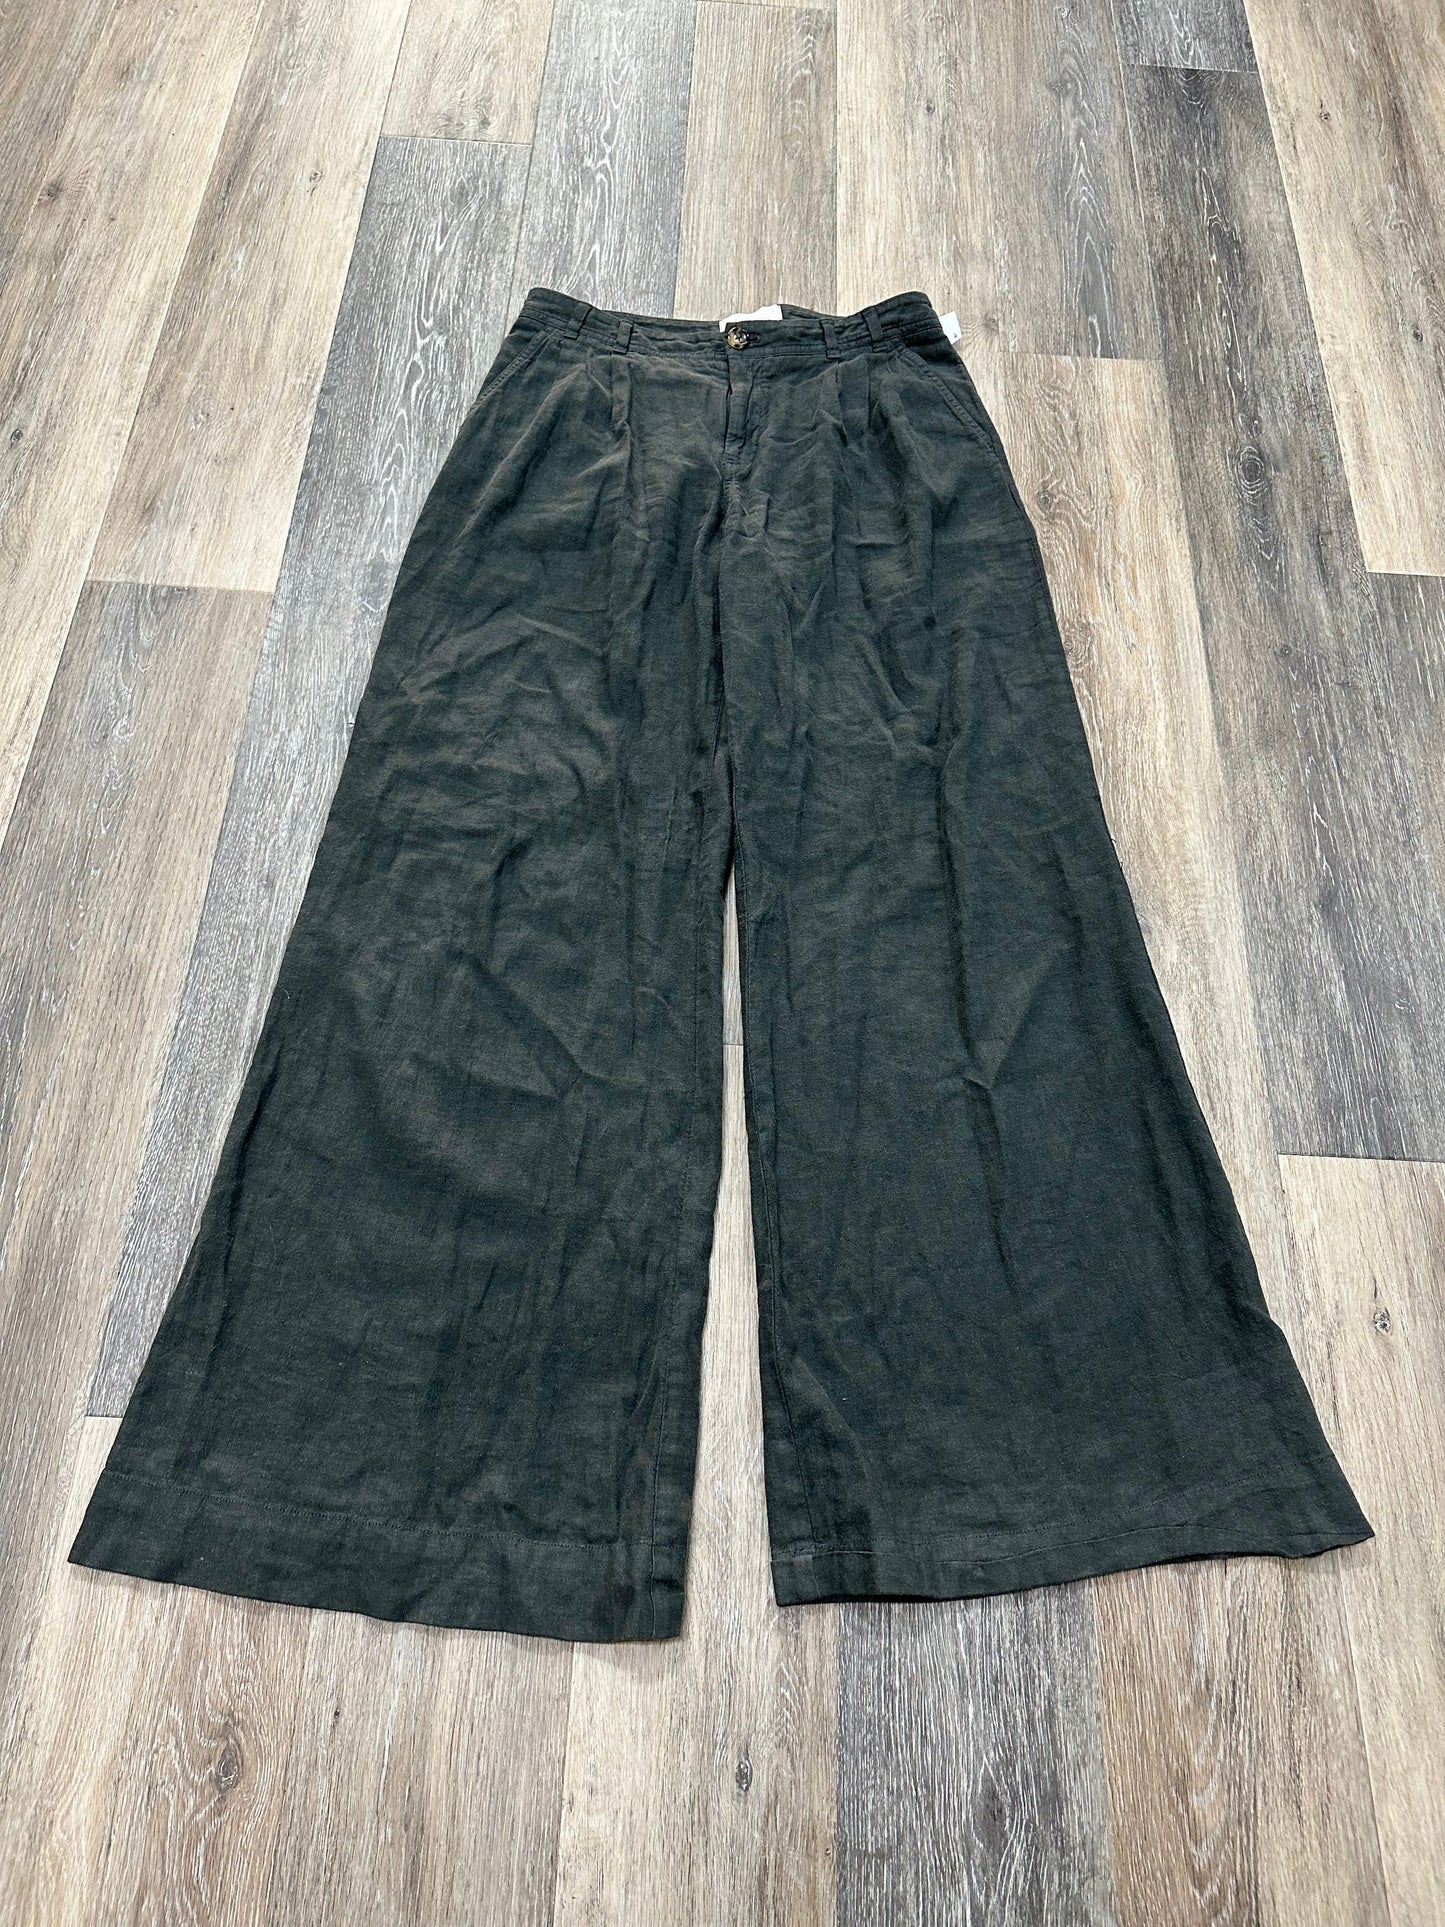 Pants Ankle By Anthropologie  Size: 4